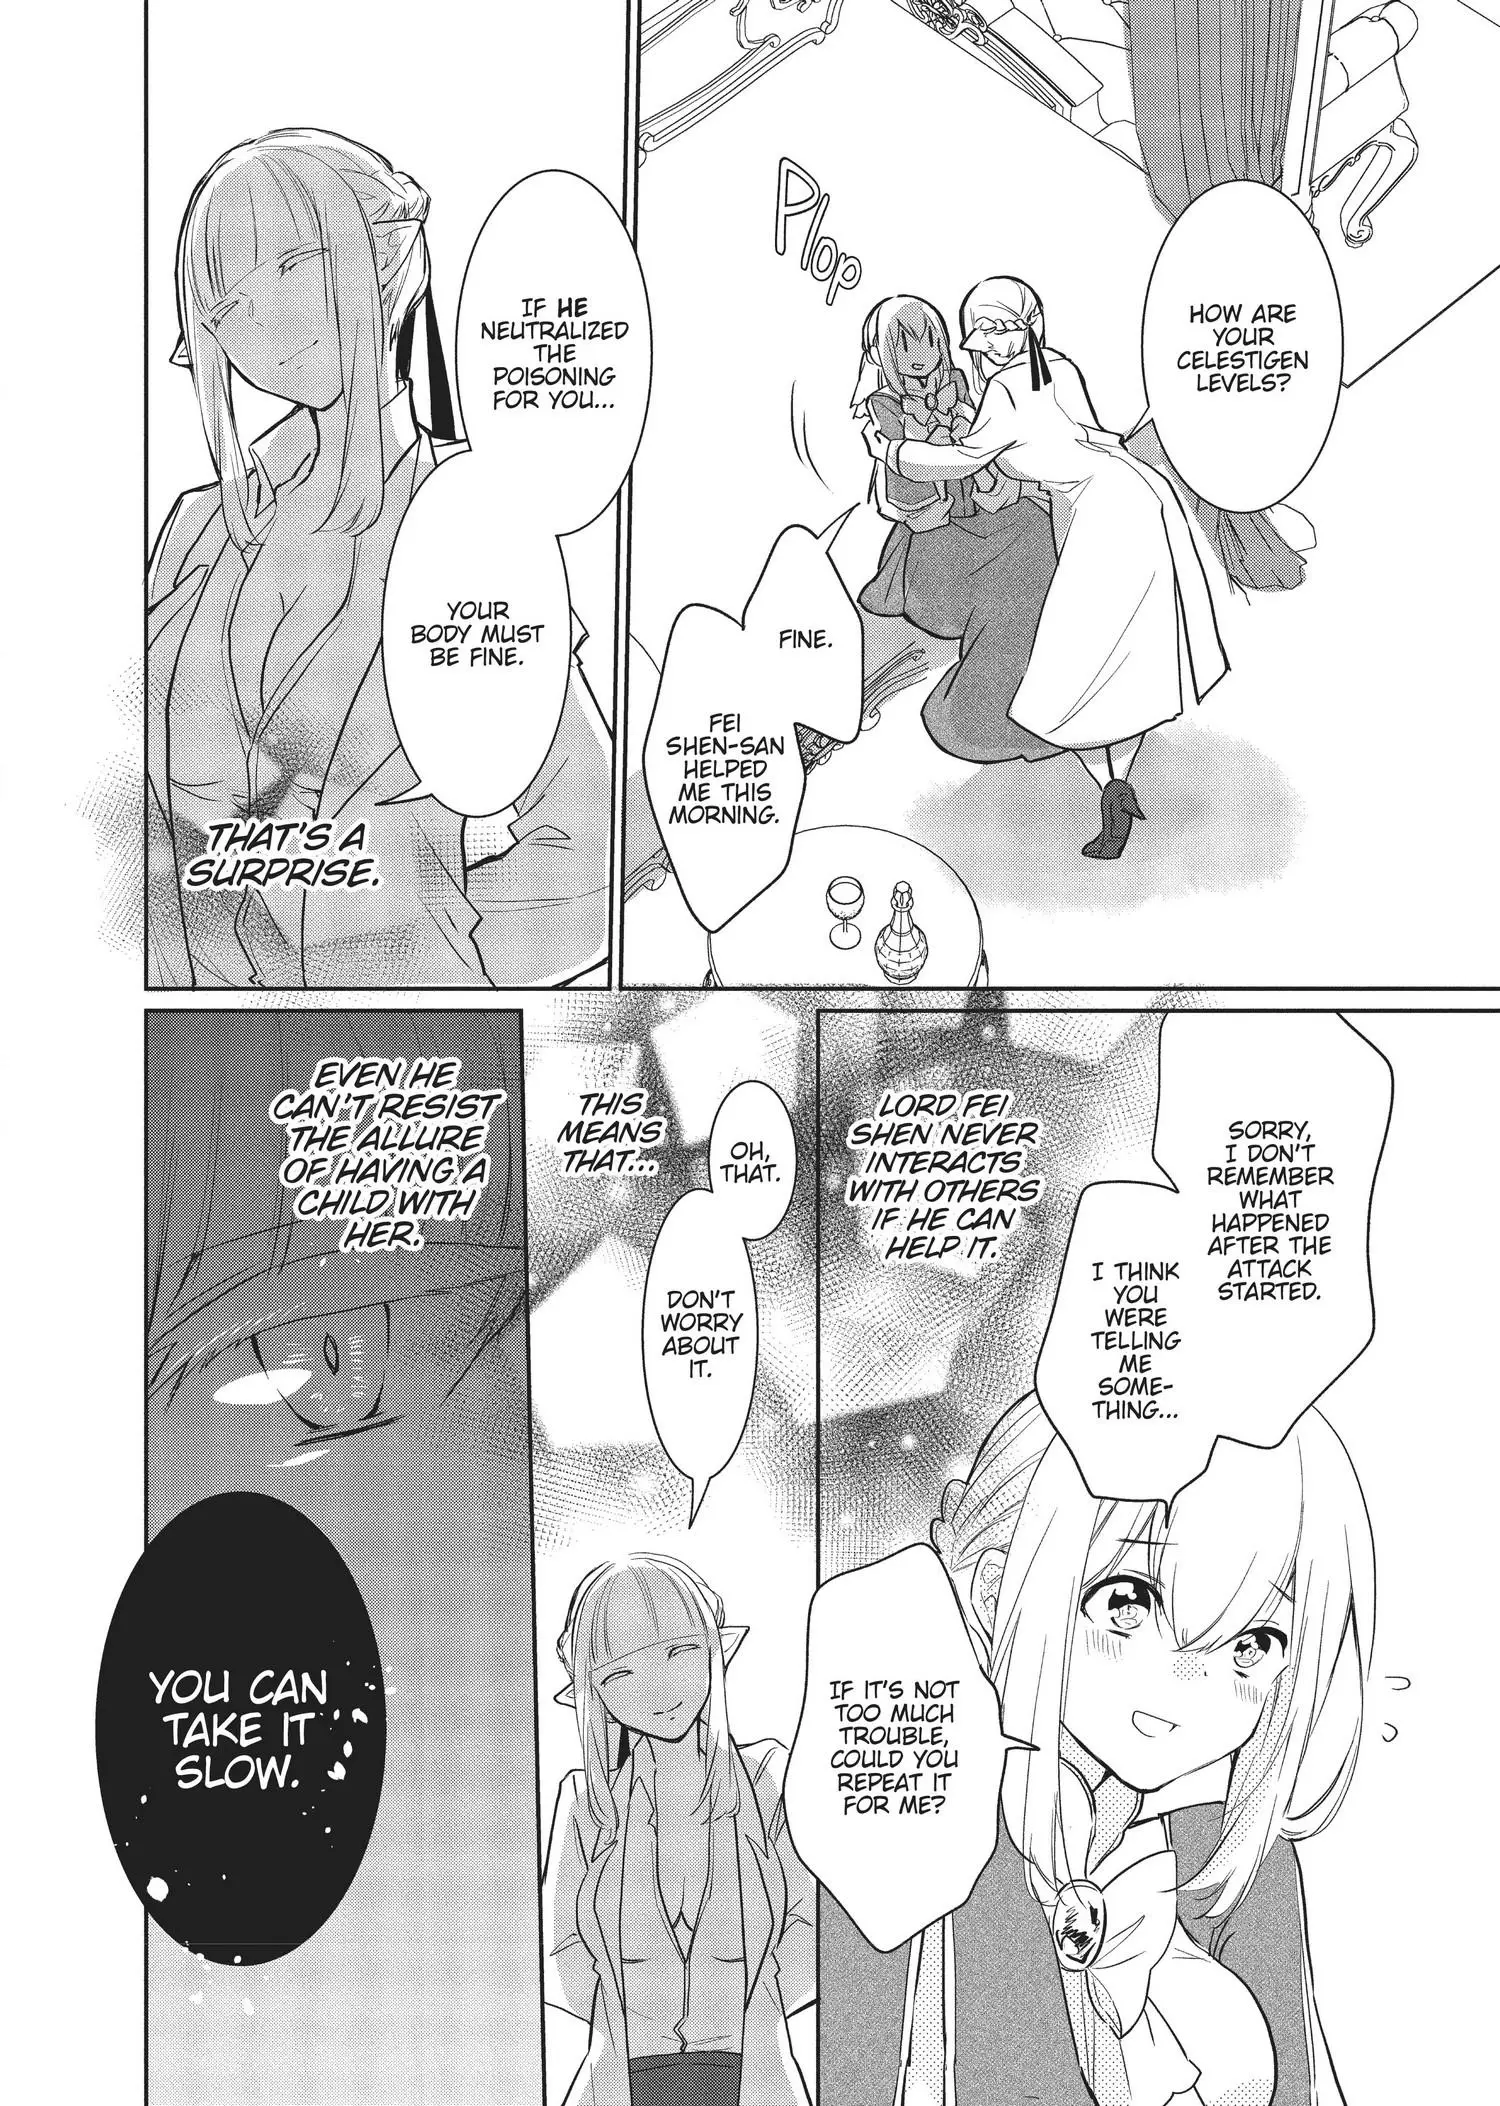 Outbride -Ikei Konin- - 9 page 13-fb7bd0f9